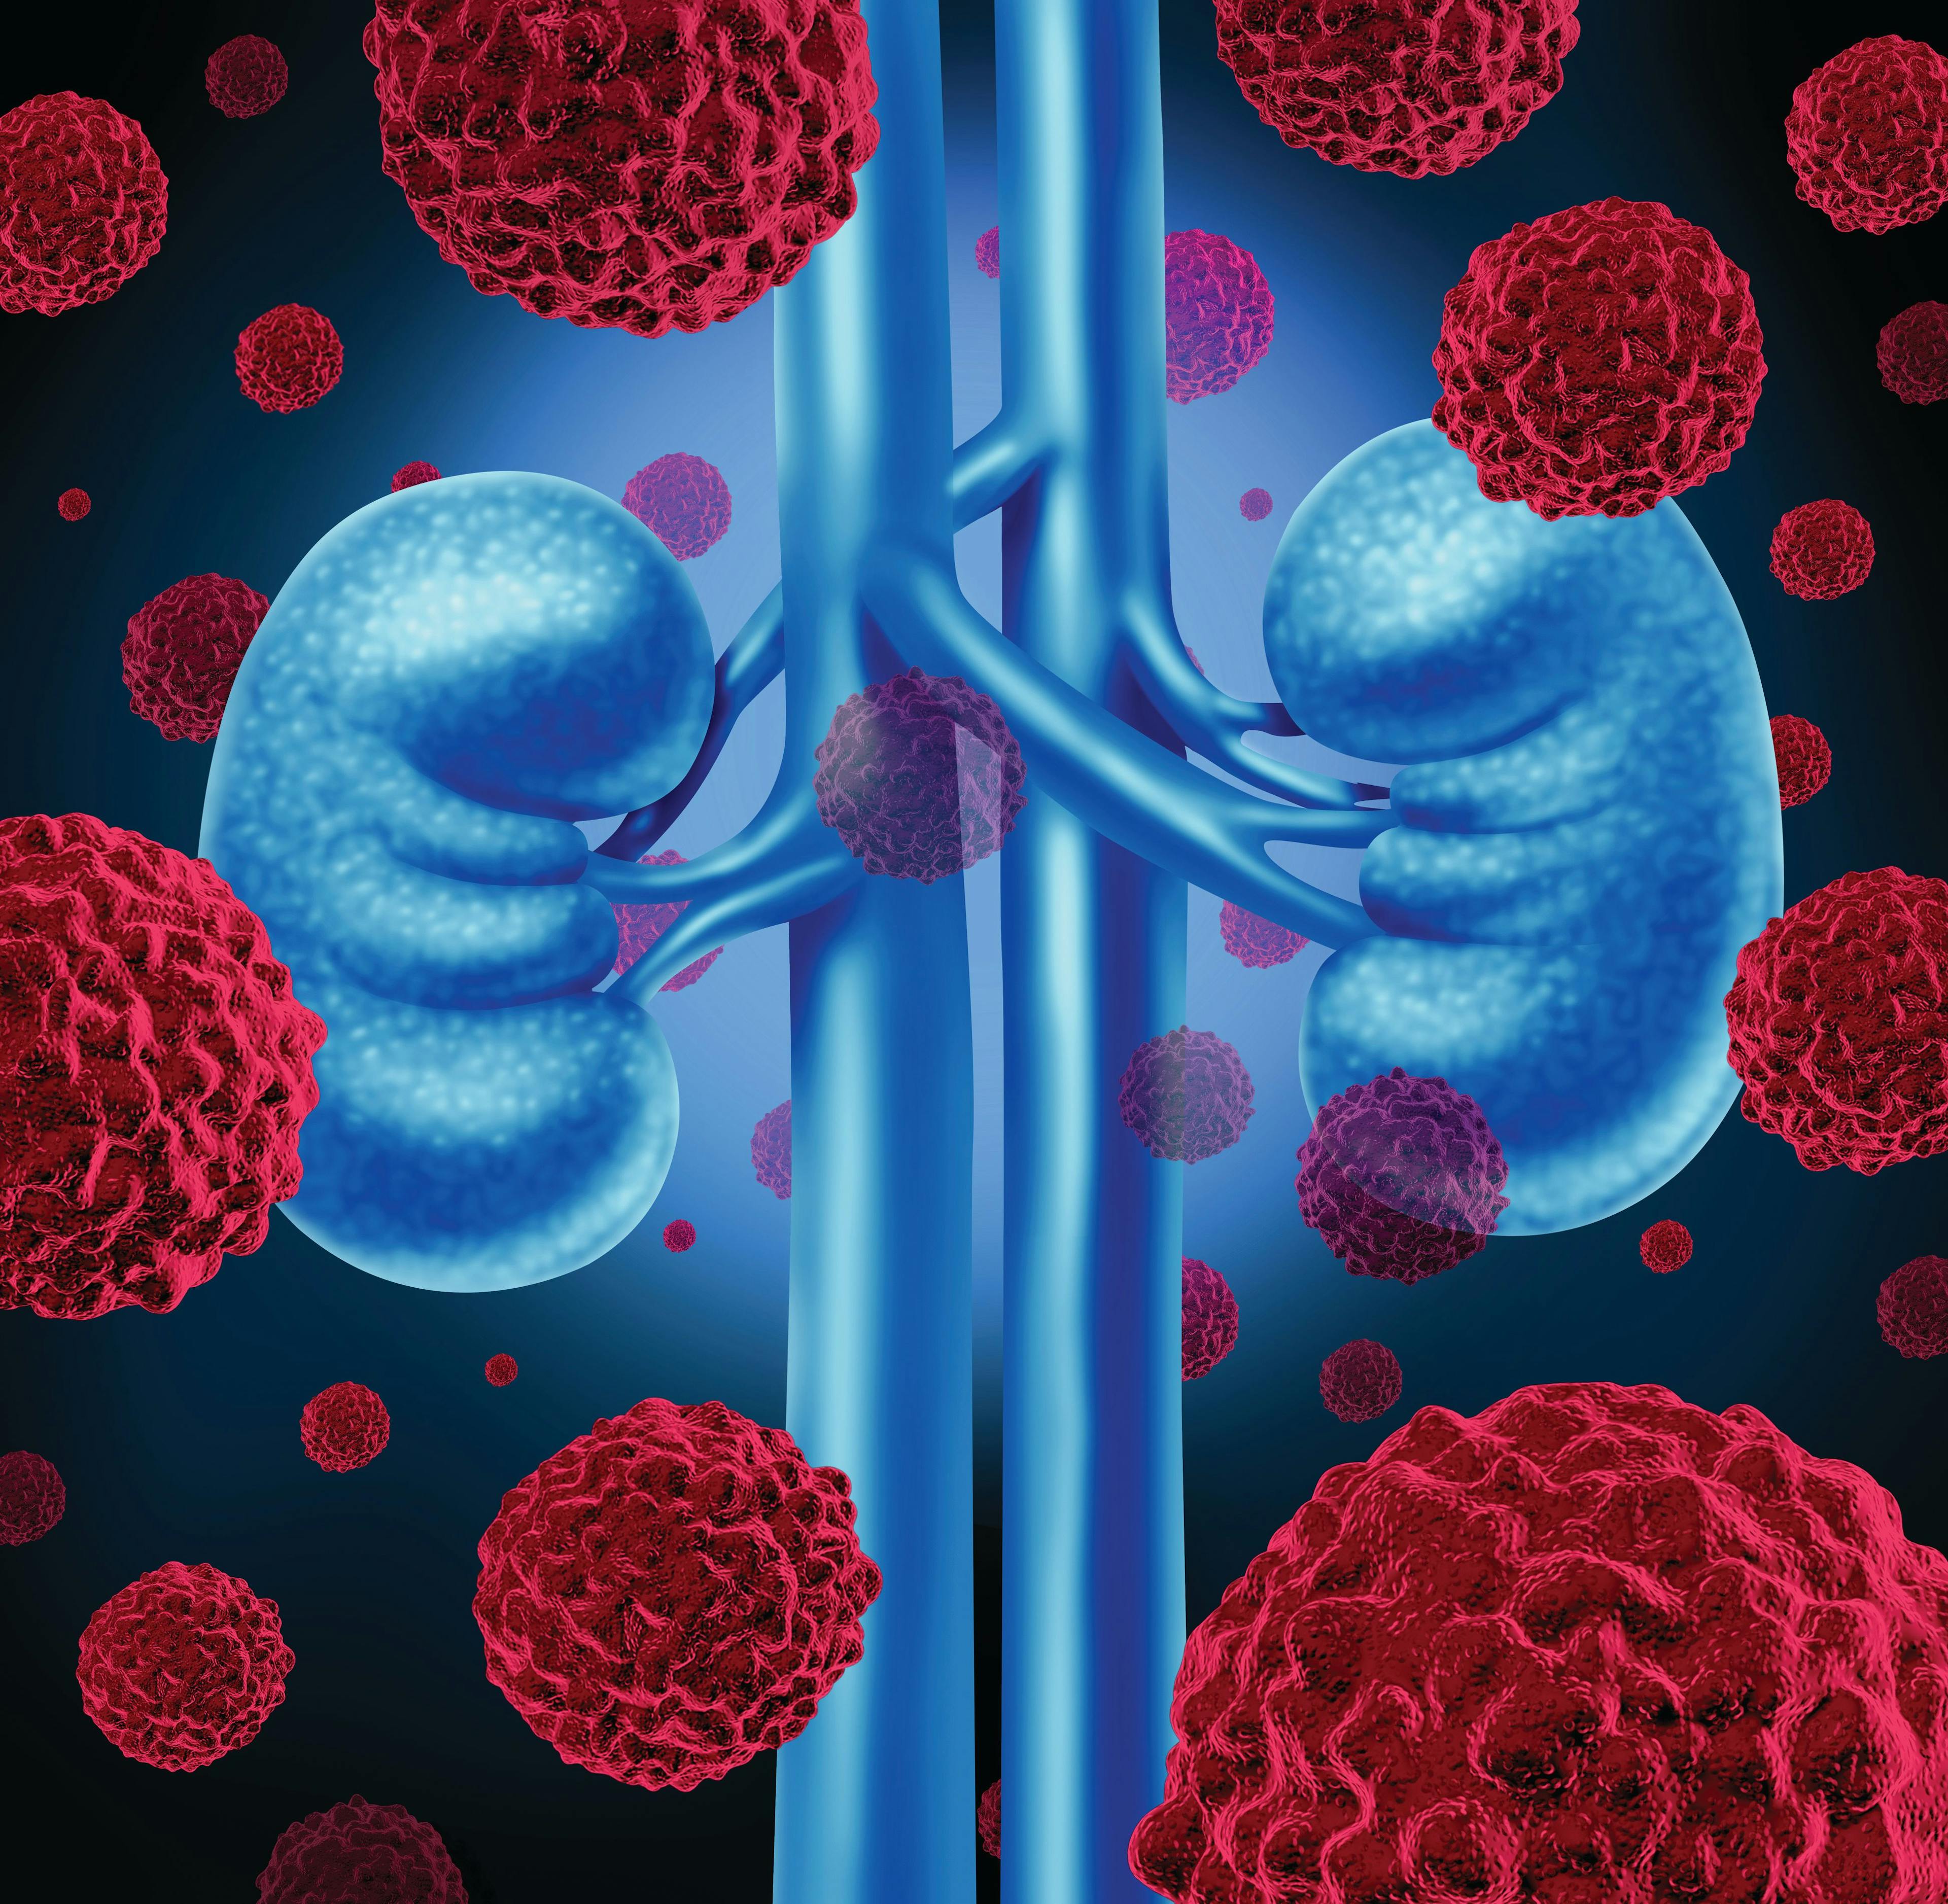 NCCN Recommends Lenvima Plus Keytruda for First-Line Renal Cell Carcinoma: What Patients Should Know